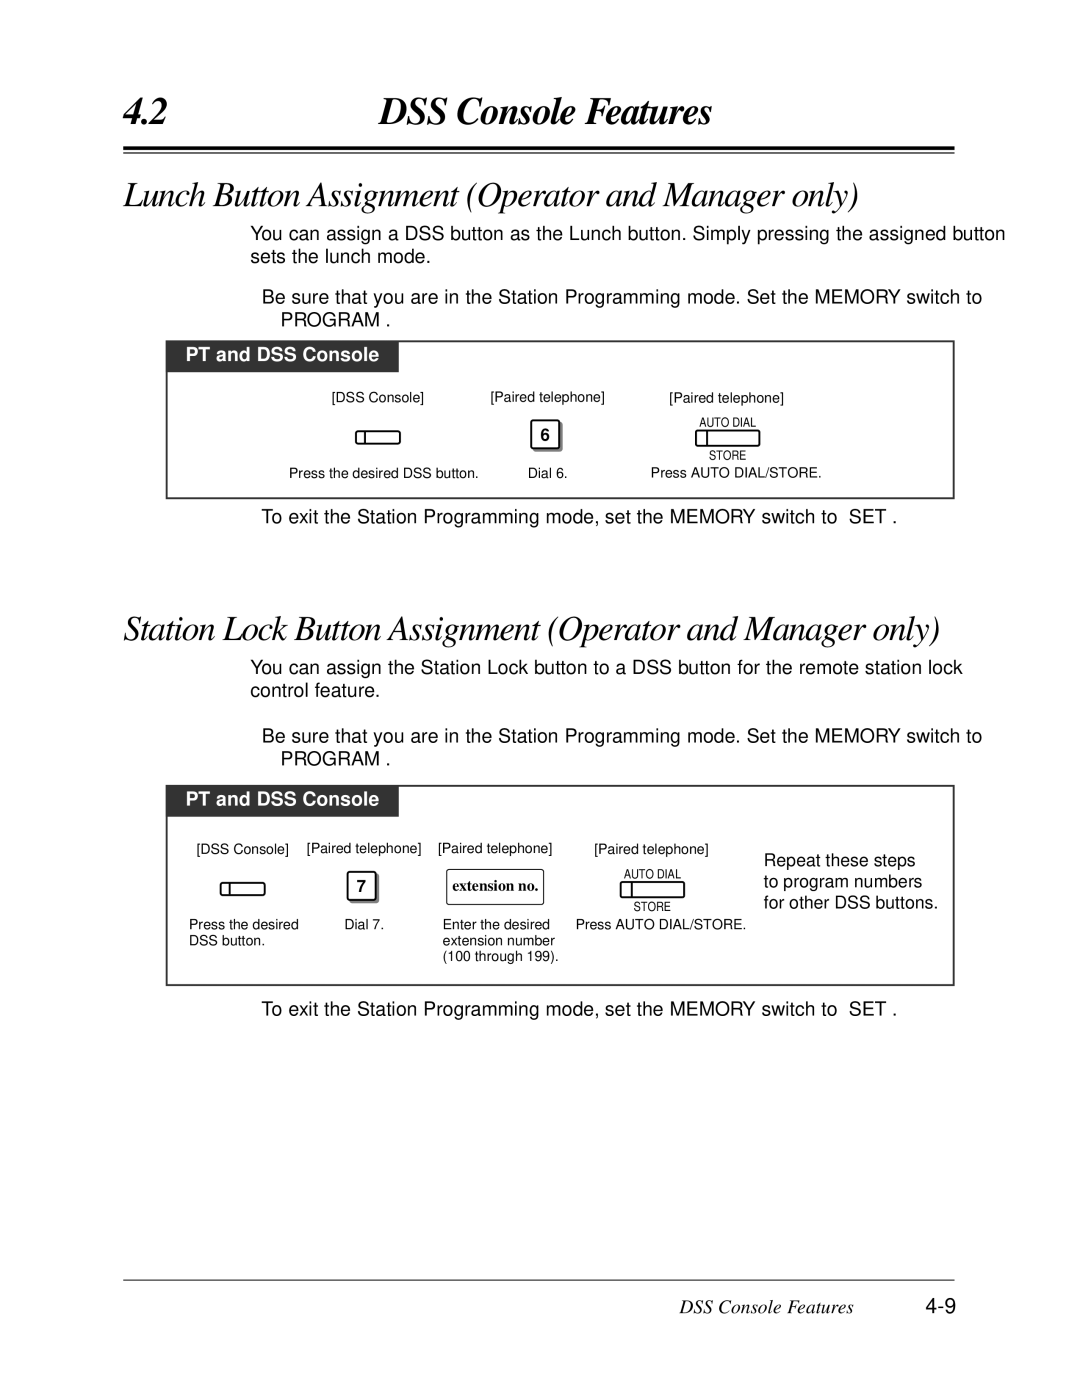 Panasonic KX-TA624 user manual Lunch Button Assignment Operator and Manager only 